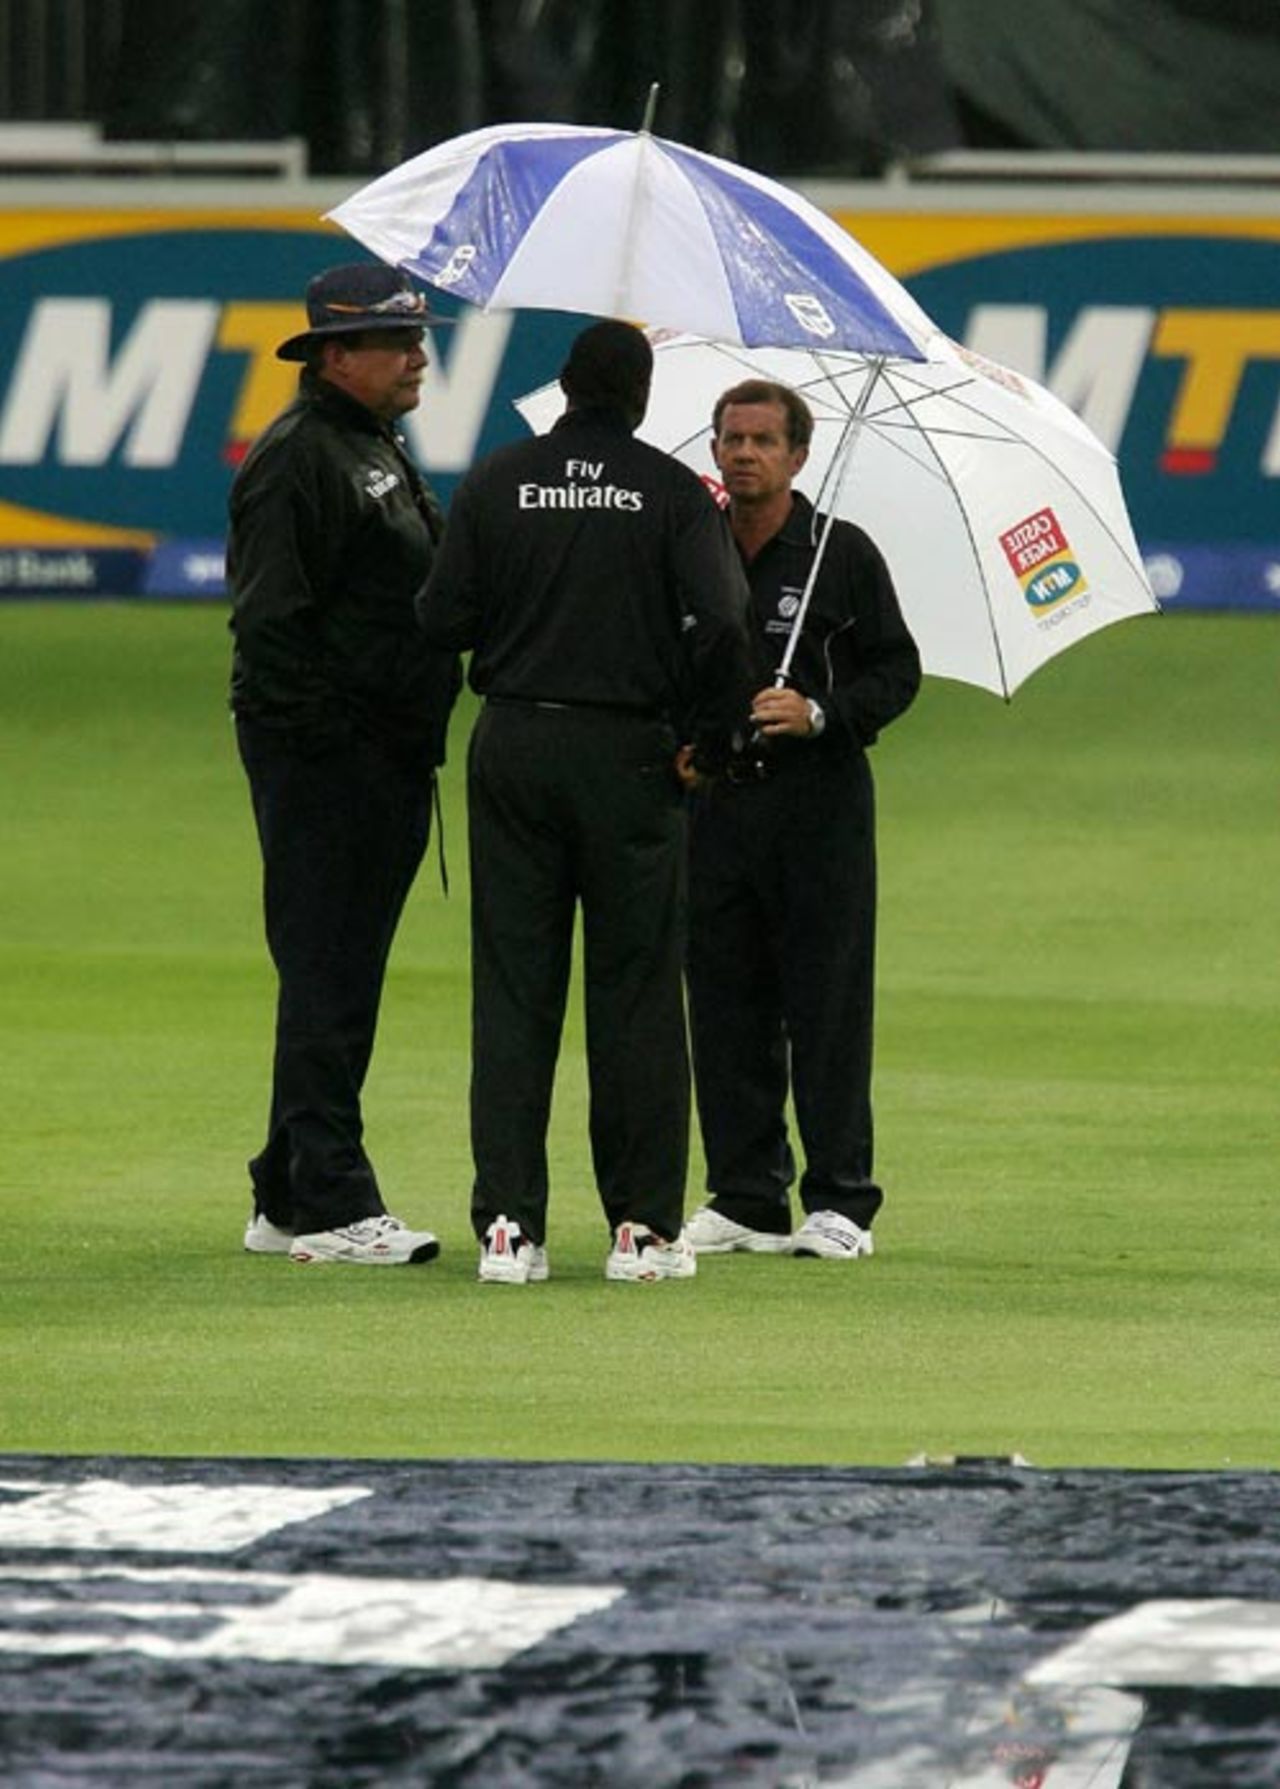 The umpires inspect the soggy outfield, South Africa v India, 1st ODI, Johannesburg, November 19, 2006